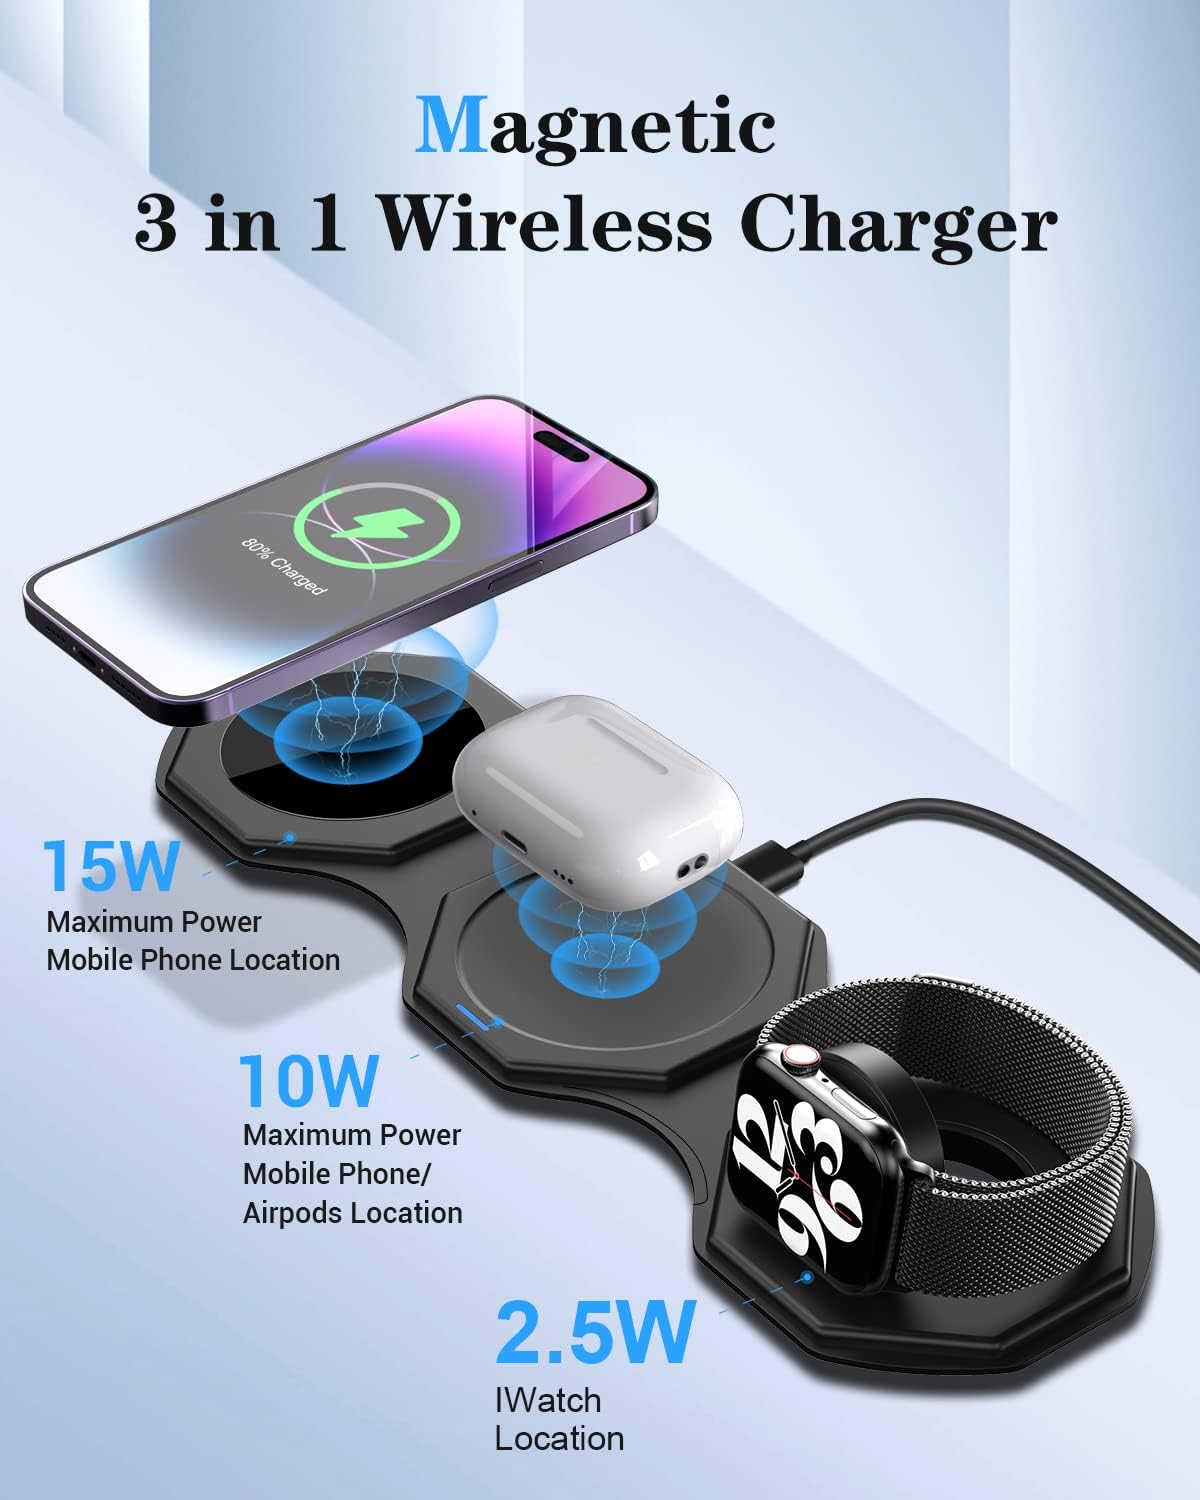 Wireless Charger 3 in 1, Magnetic Foldable Wireless Charging Station for iPhone 14/13/12/11 Pro Max/X/Xs Max/8/8 Plus, AirPods 3/2/pro, iWatch Series 7/6/5/SE/4/3/2 (Adapter Included)